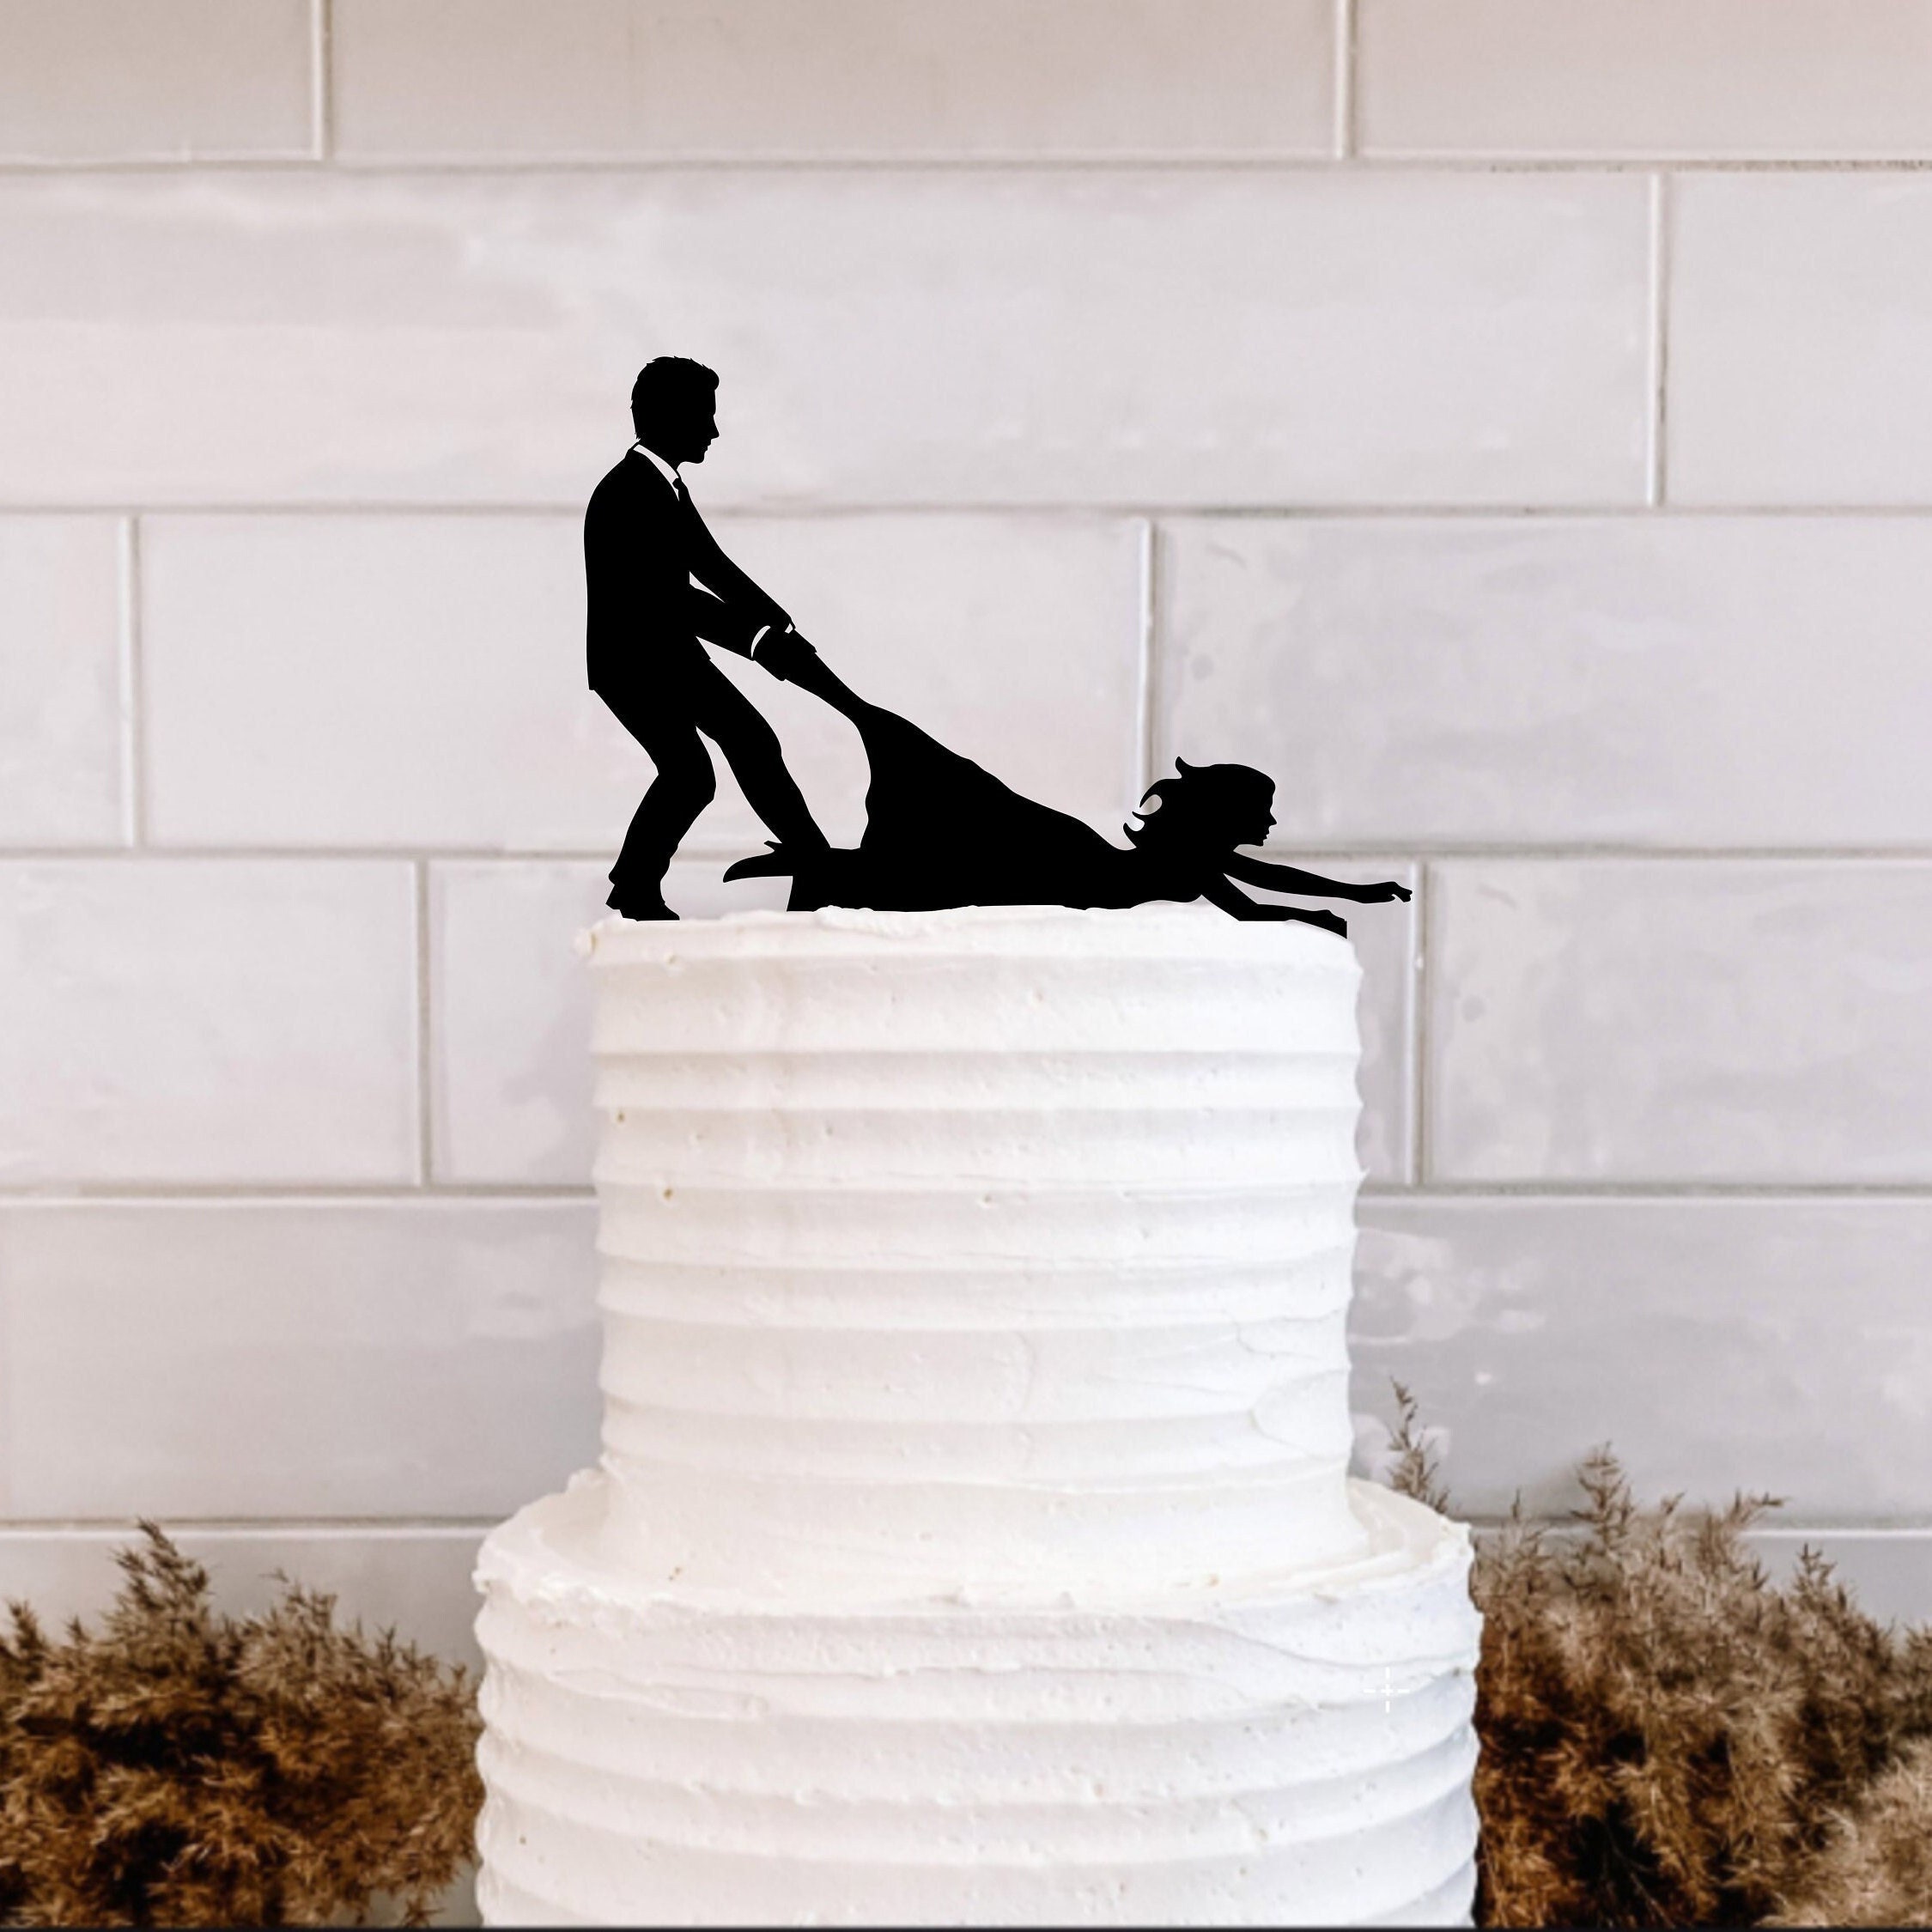 Personalized Fishing Wedding Cake Topper With Dog, Fishing Themed